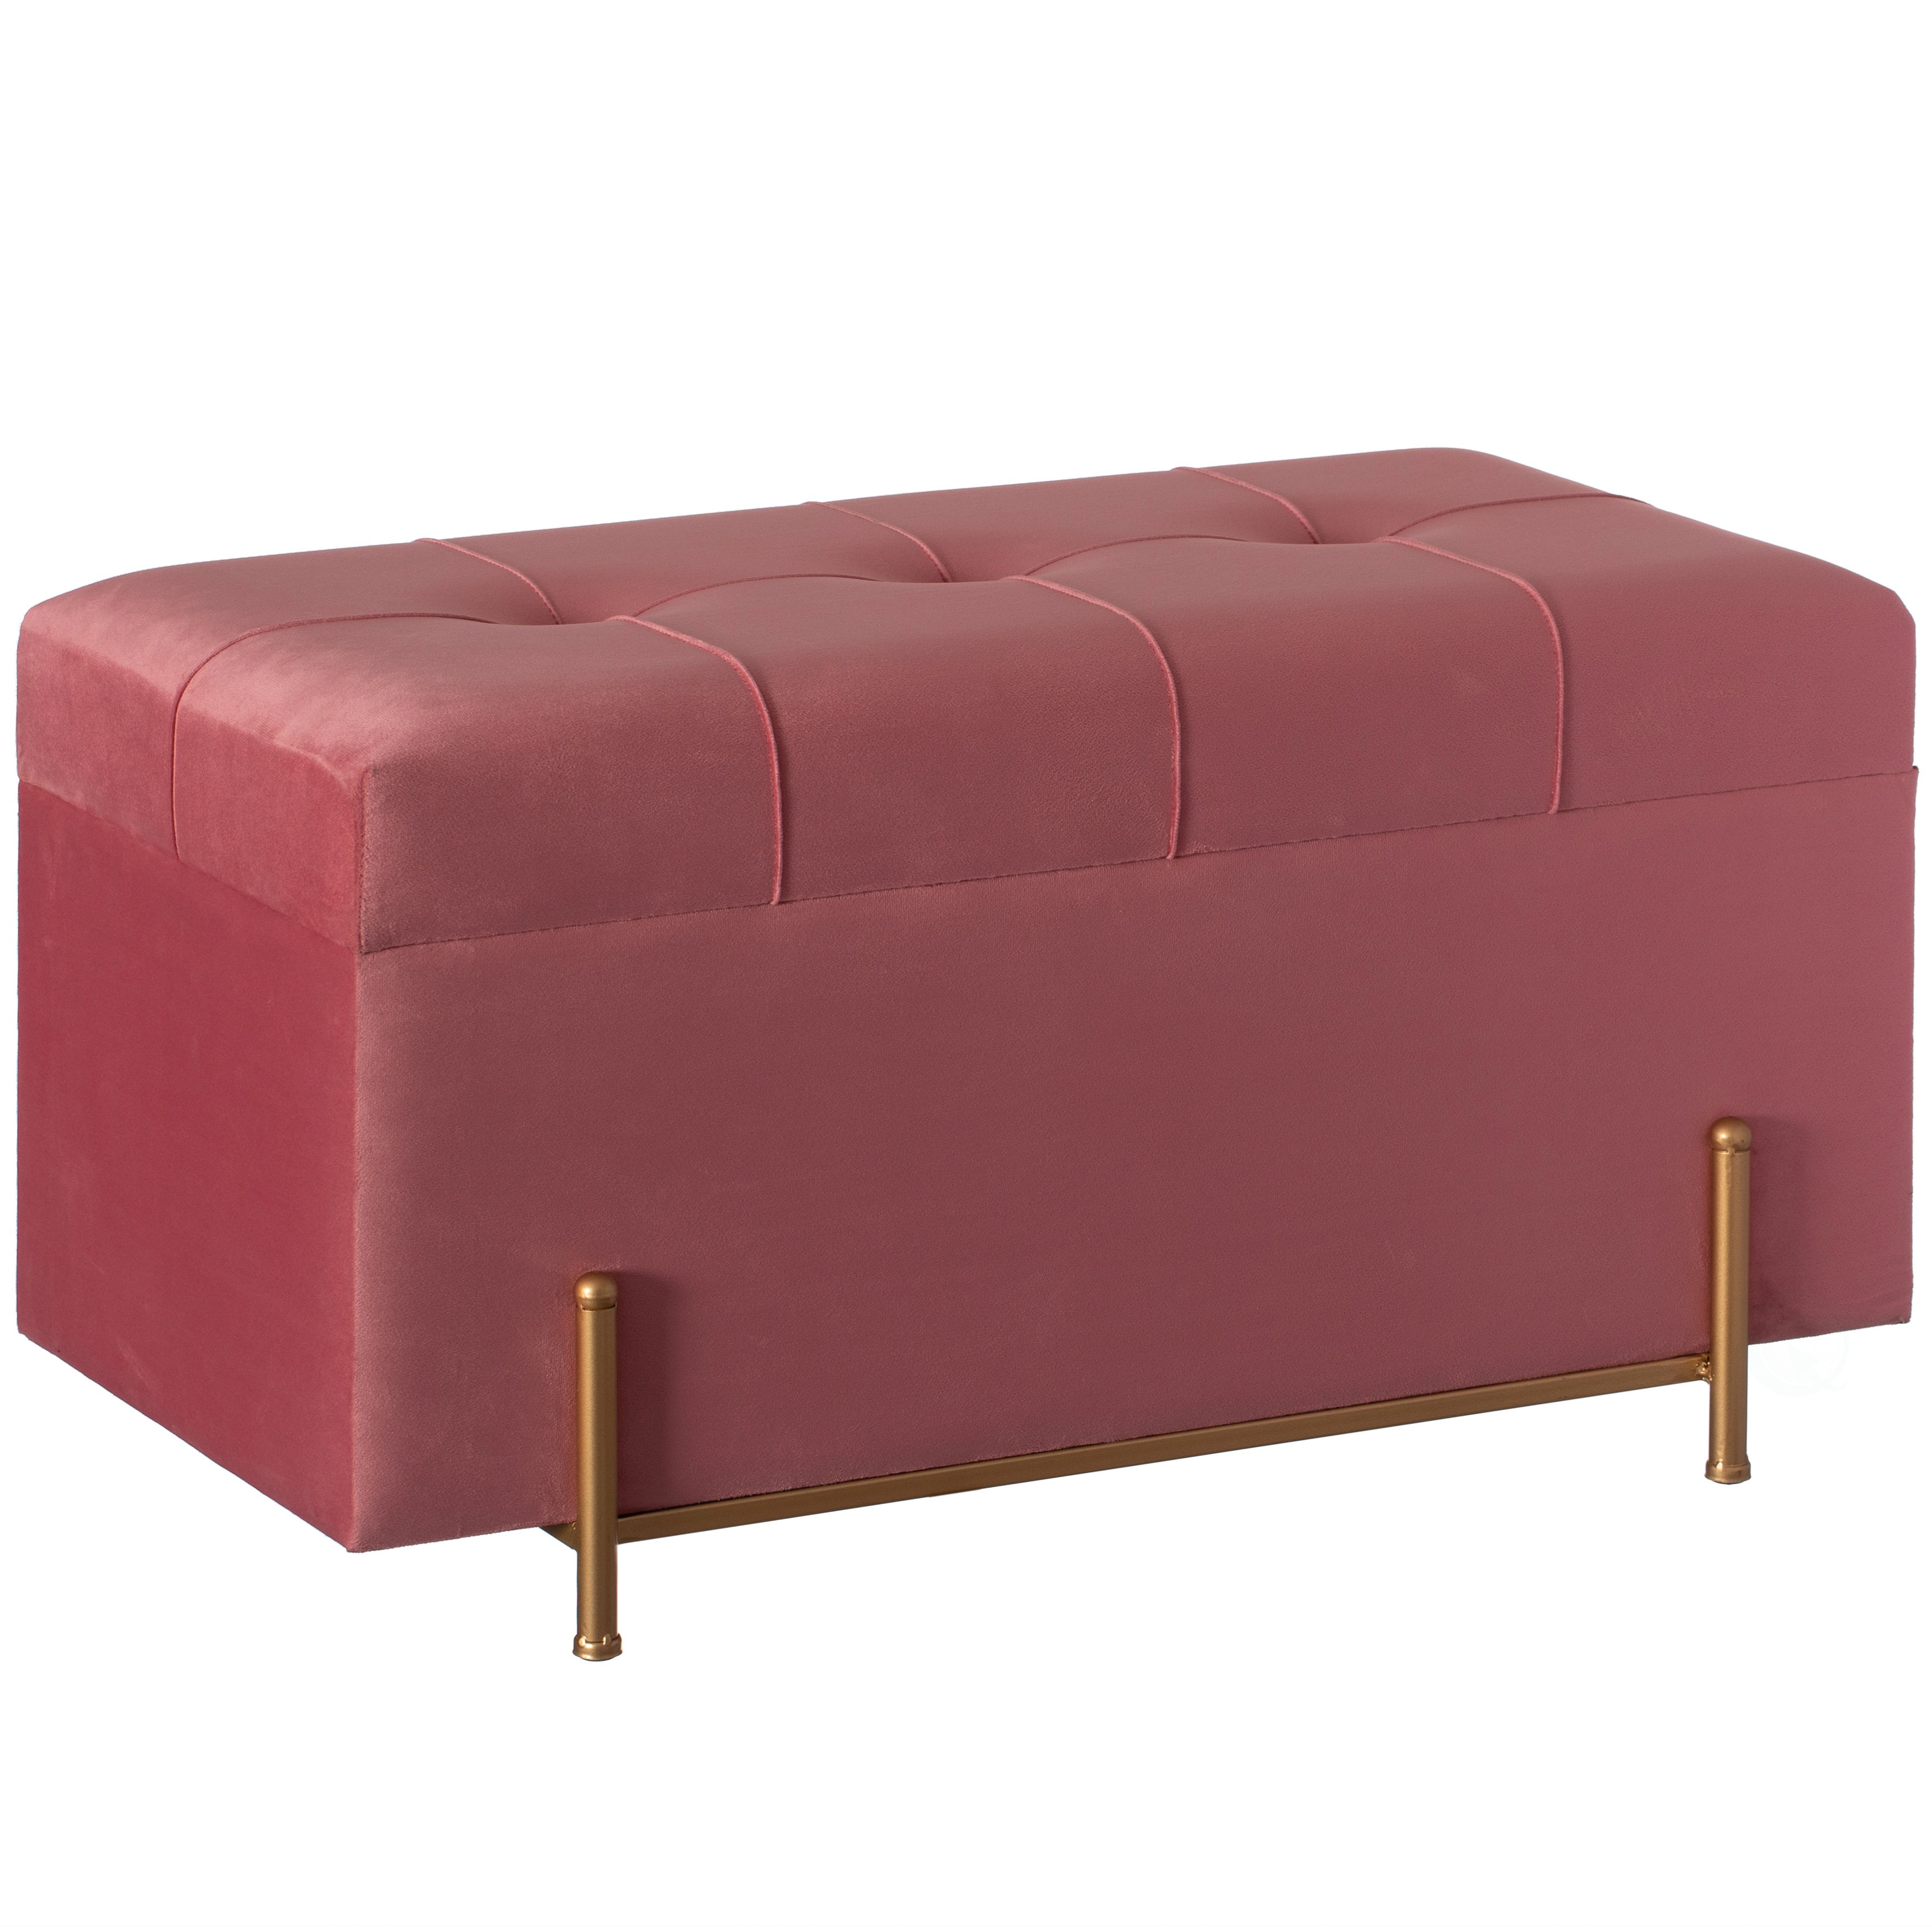 Large Rectangle Velvet Storage Ottoman Stool Box with Golden Legs Decorative Sitting Bench for Living Room Home Decor - Pink